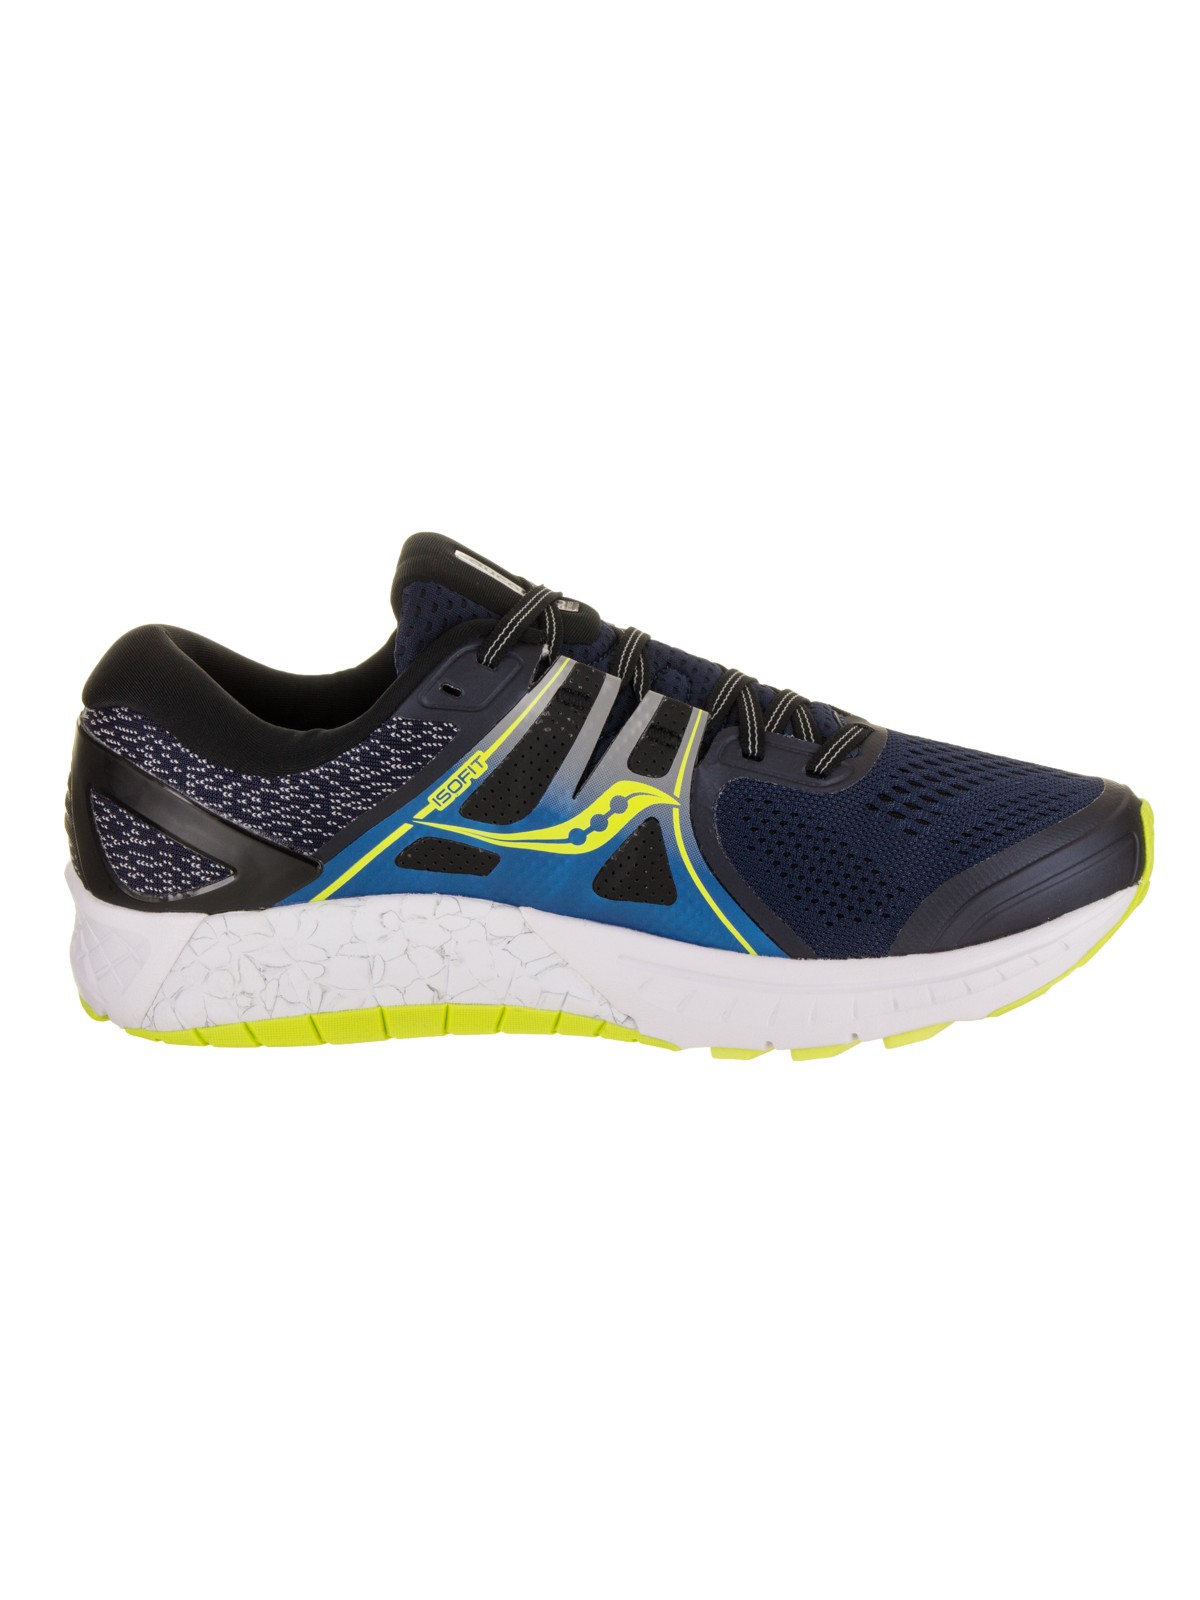 Saucony Mens Omni ISO Road Running Shoe Sneaker - Navy/Blue/Citron - Size 11.5 - image 2 of 5